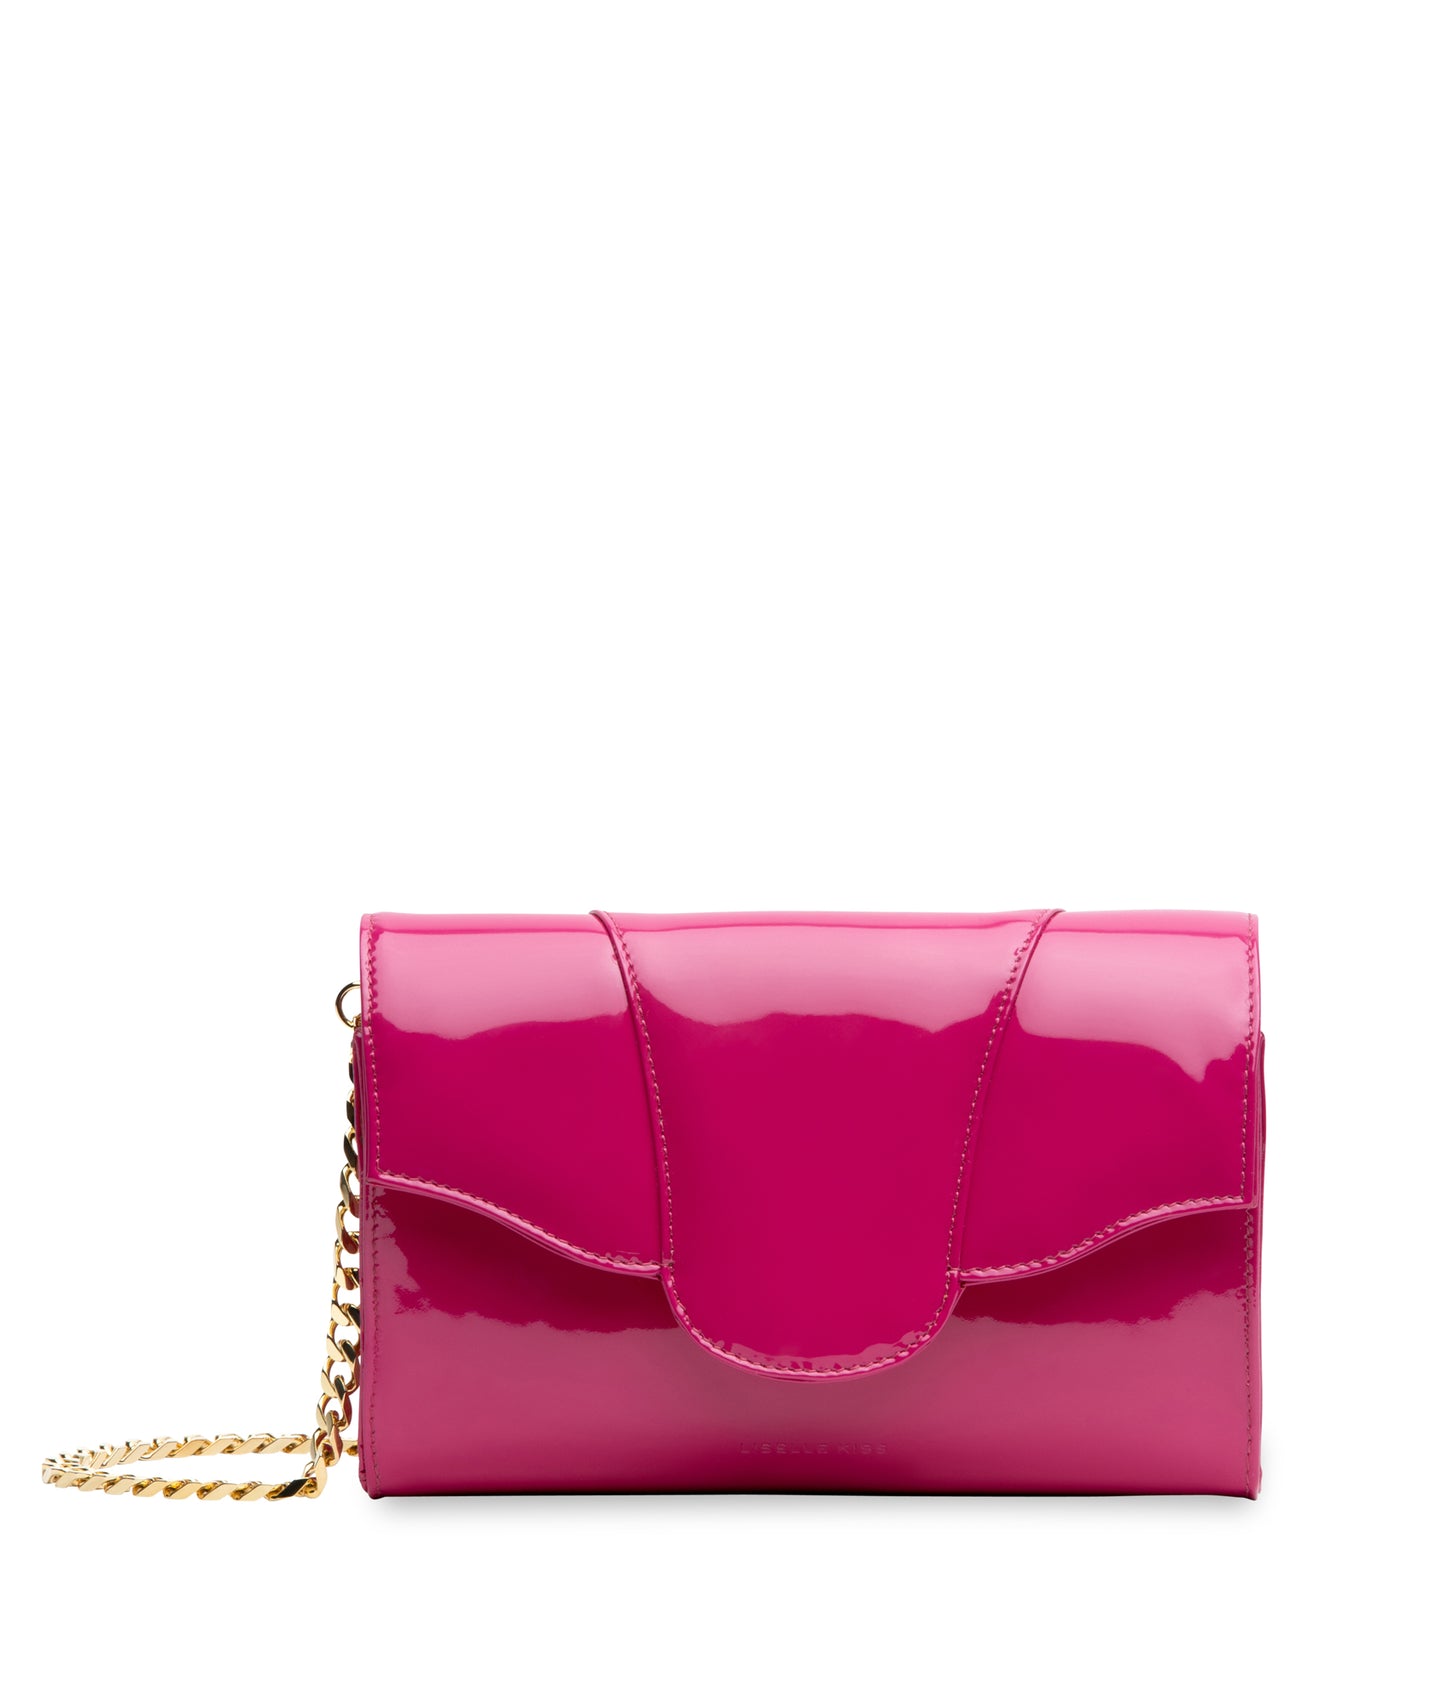 Allie Neon Pink Glossy Italian Leather Clutch